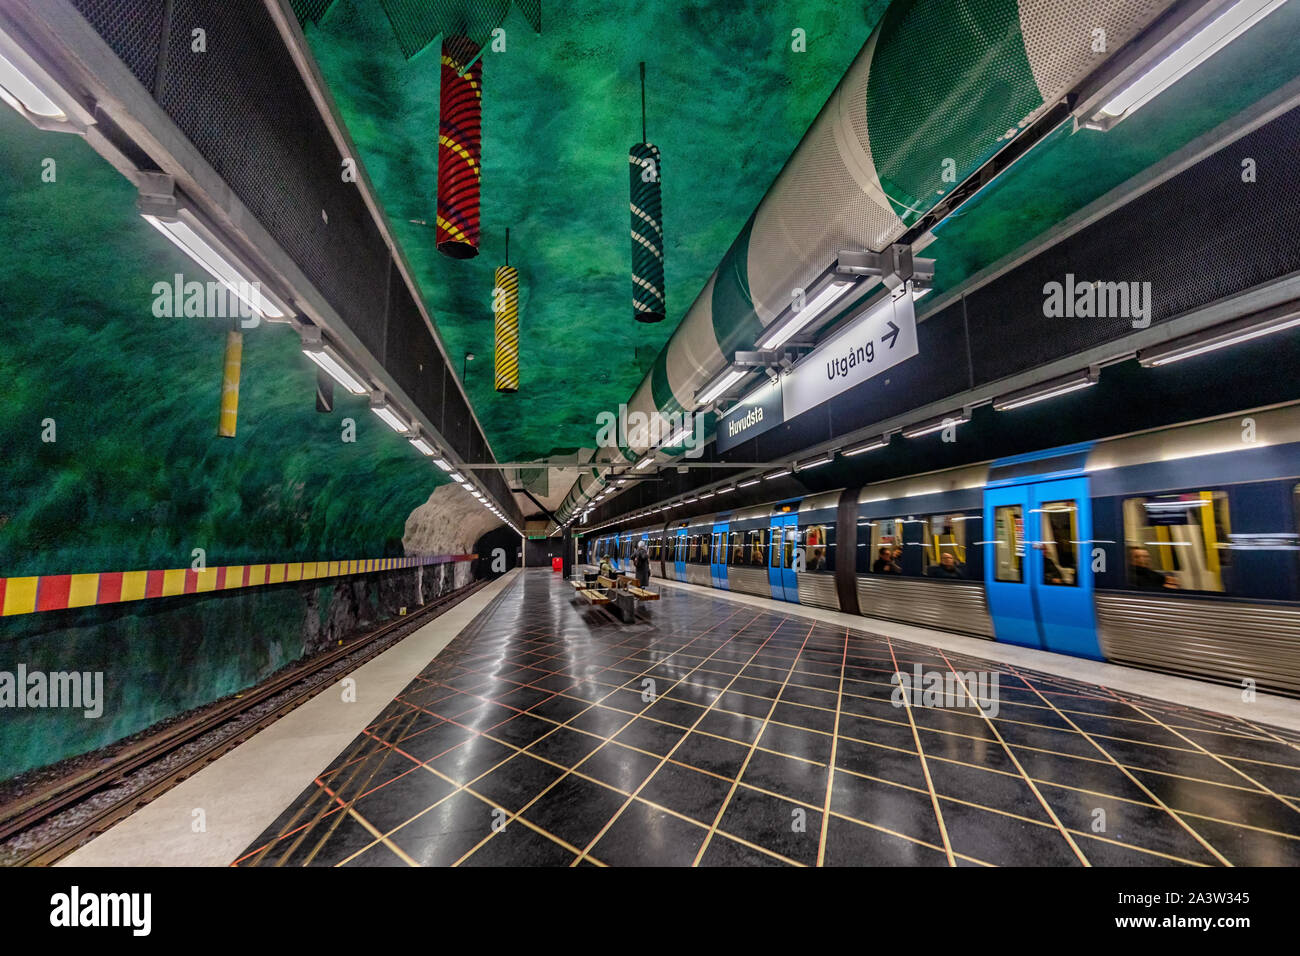 Huvudstra metro station is on the blue line of the Stockholm metro (Tunnelbana) , located in Huvudsta, Solna Municipality, central Stockholm, Sweden Stock Photo